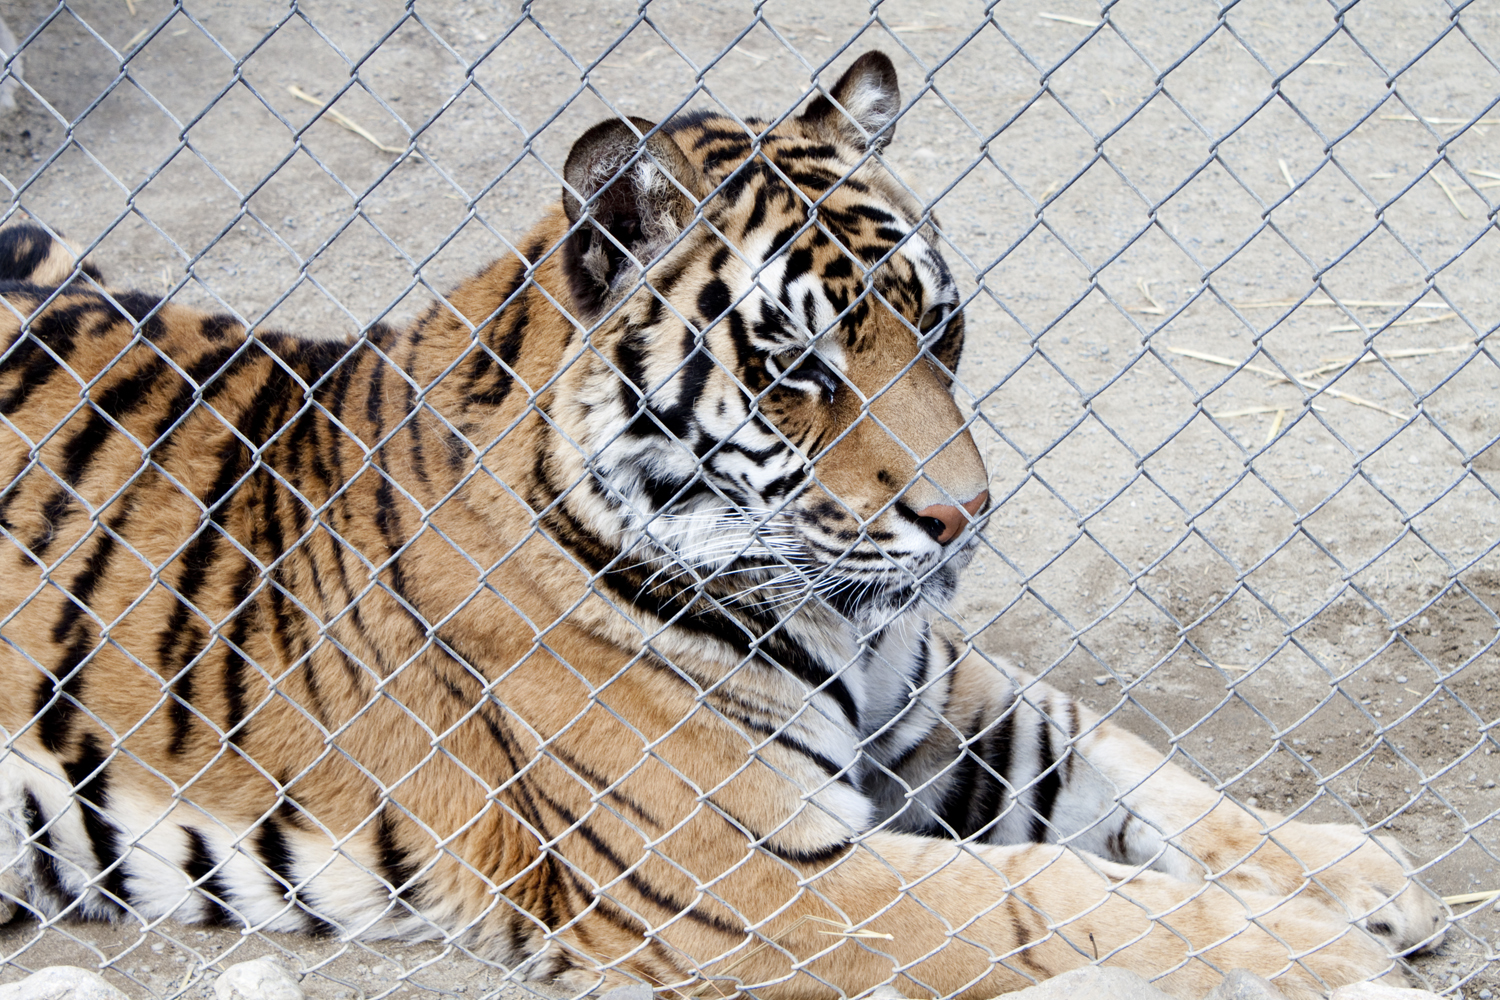 On our recent trip to Spokane Washington, we visited the Big Cat Zoo ...